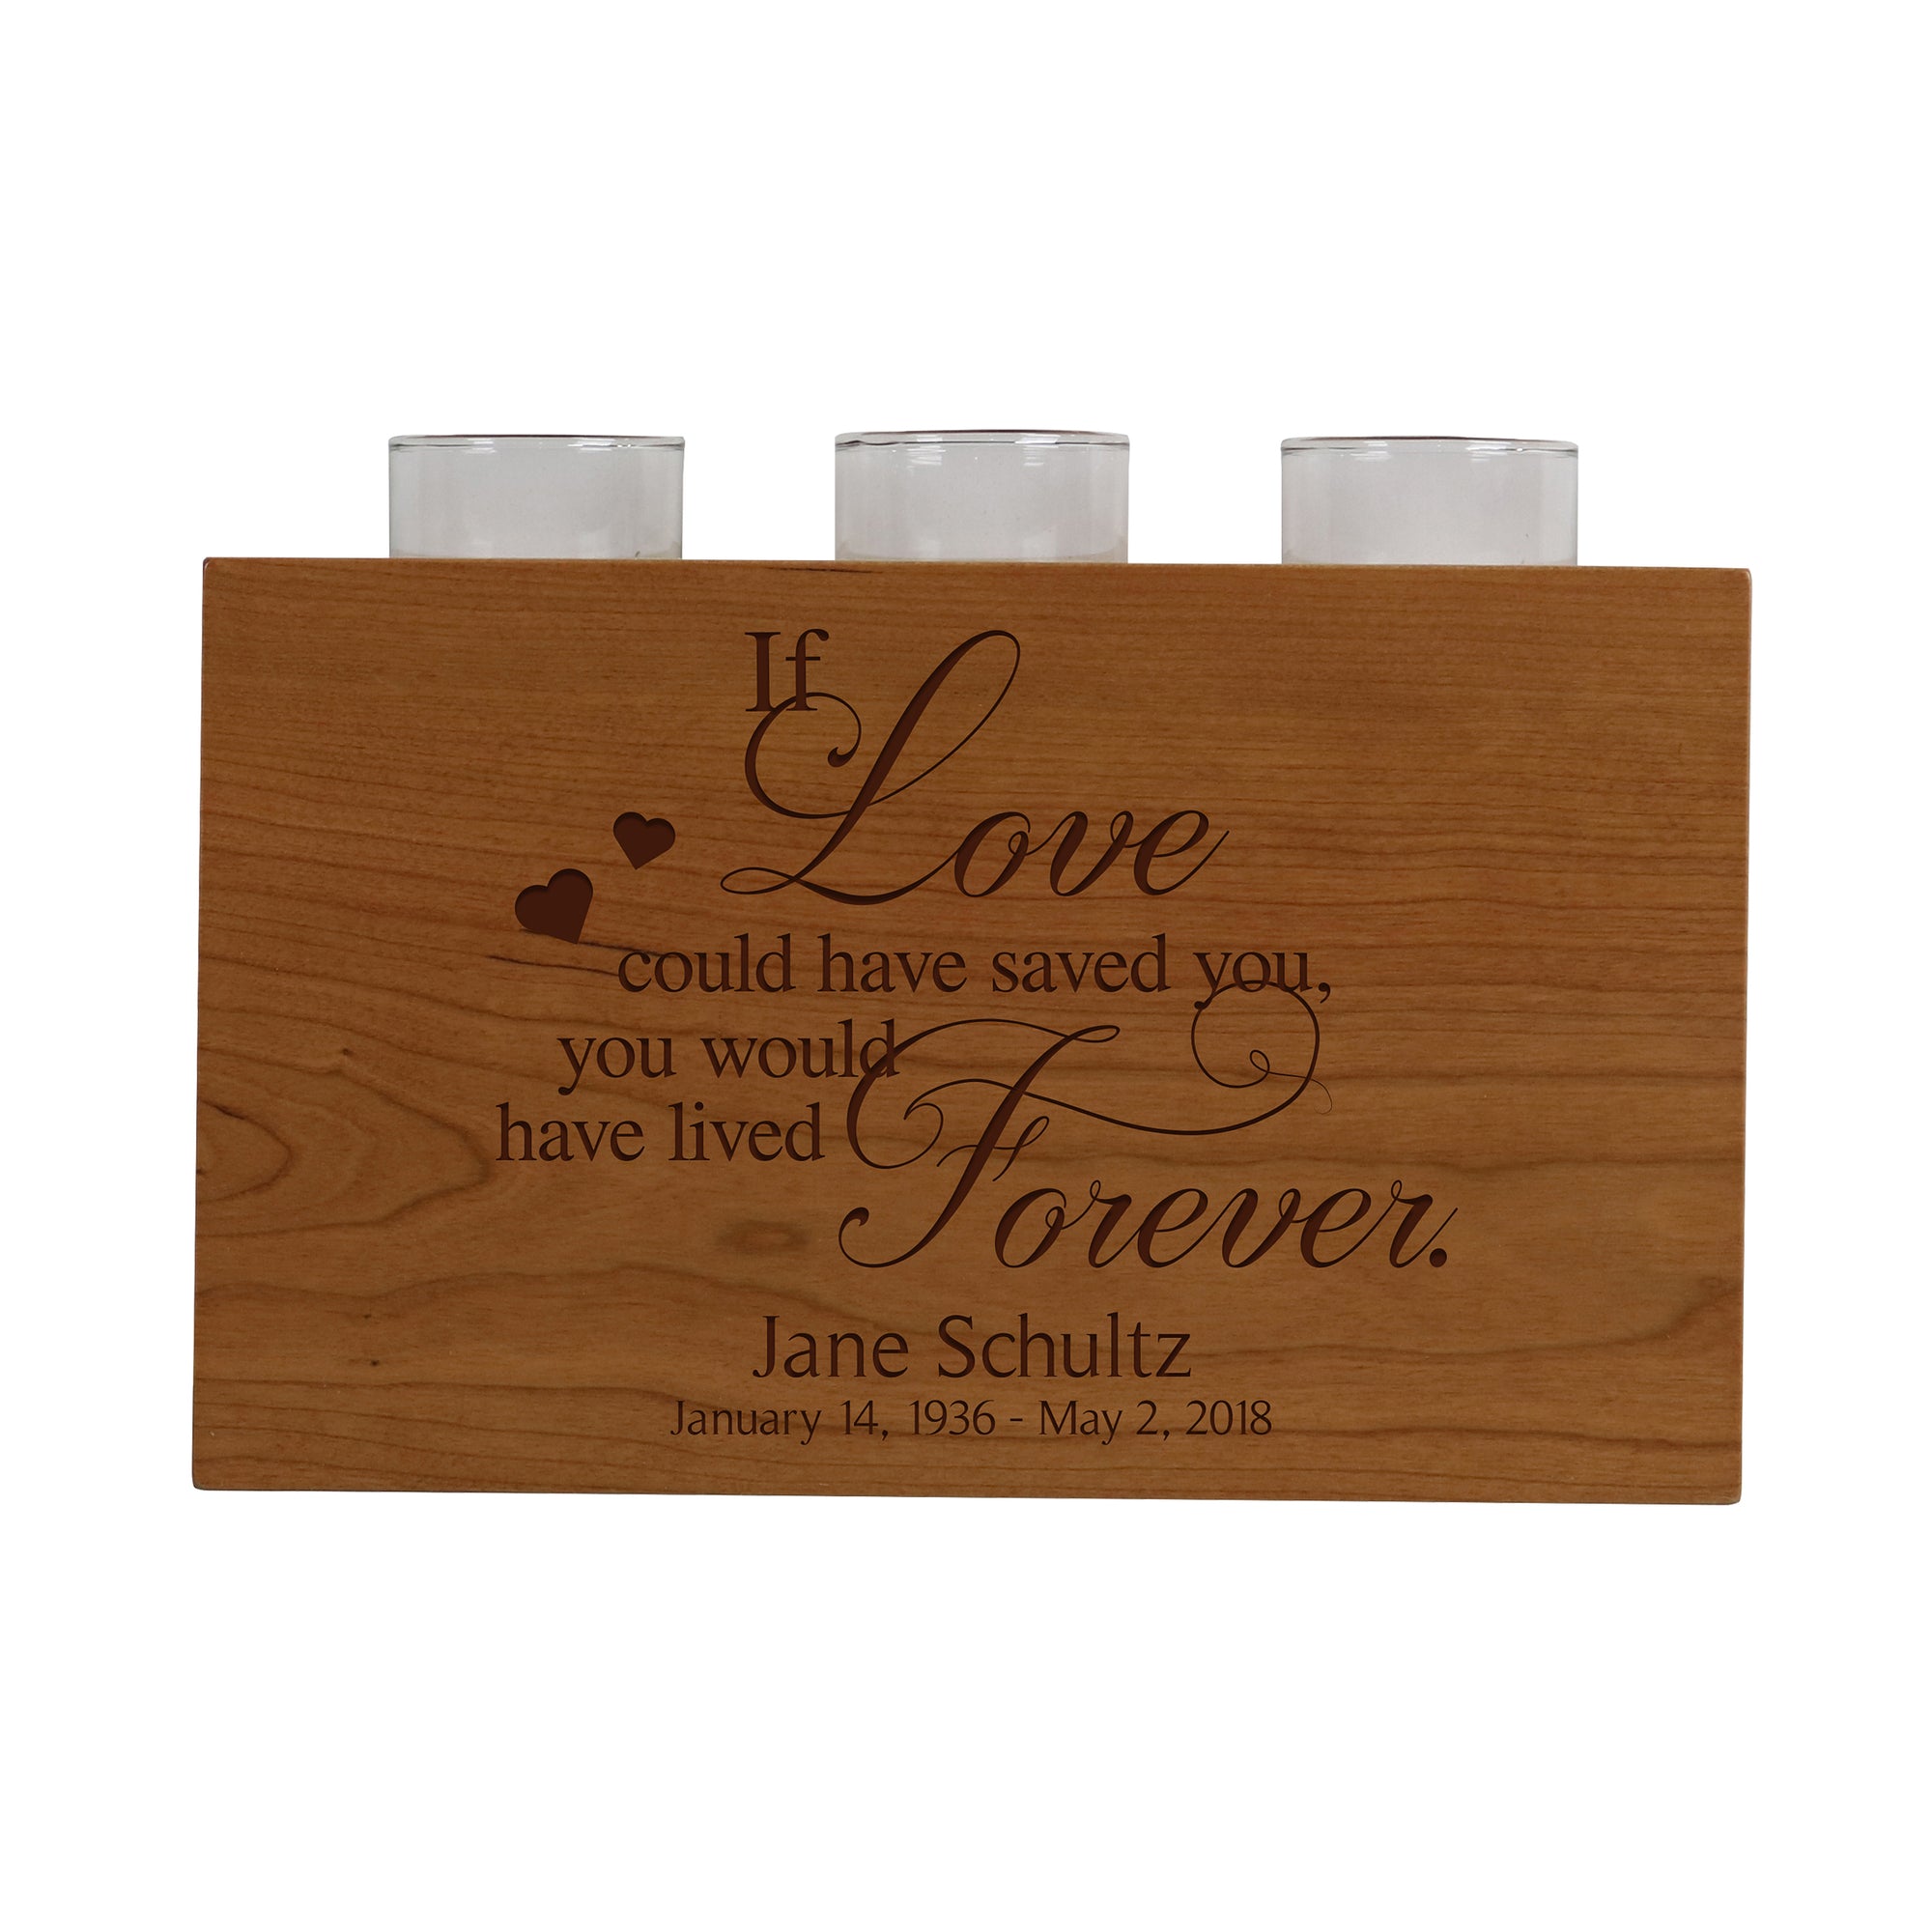 Lifesong Milestones Personalized Engraved Dual Purpose Wooden 3 Votive Candle Holder & Urn Bereavement Keepsake Candle Holder Loss of Loved One Sympathy Home Decor 10”x6”x4”